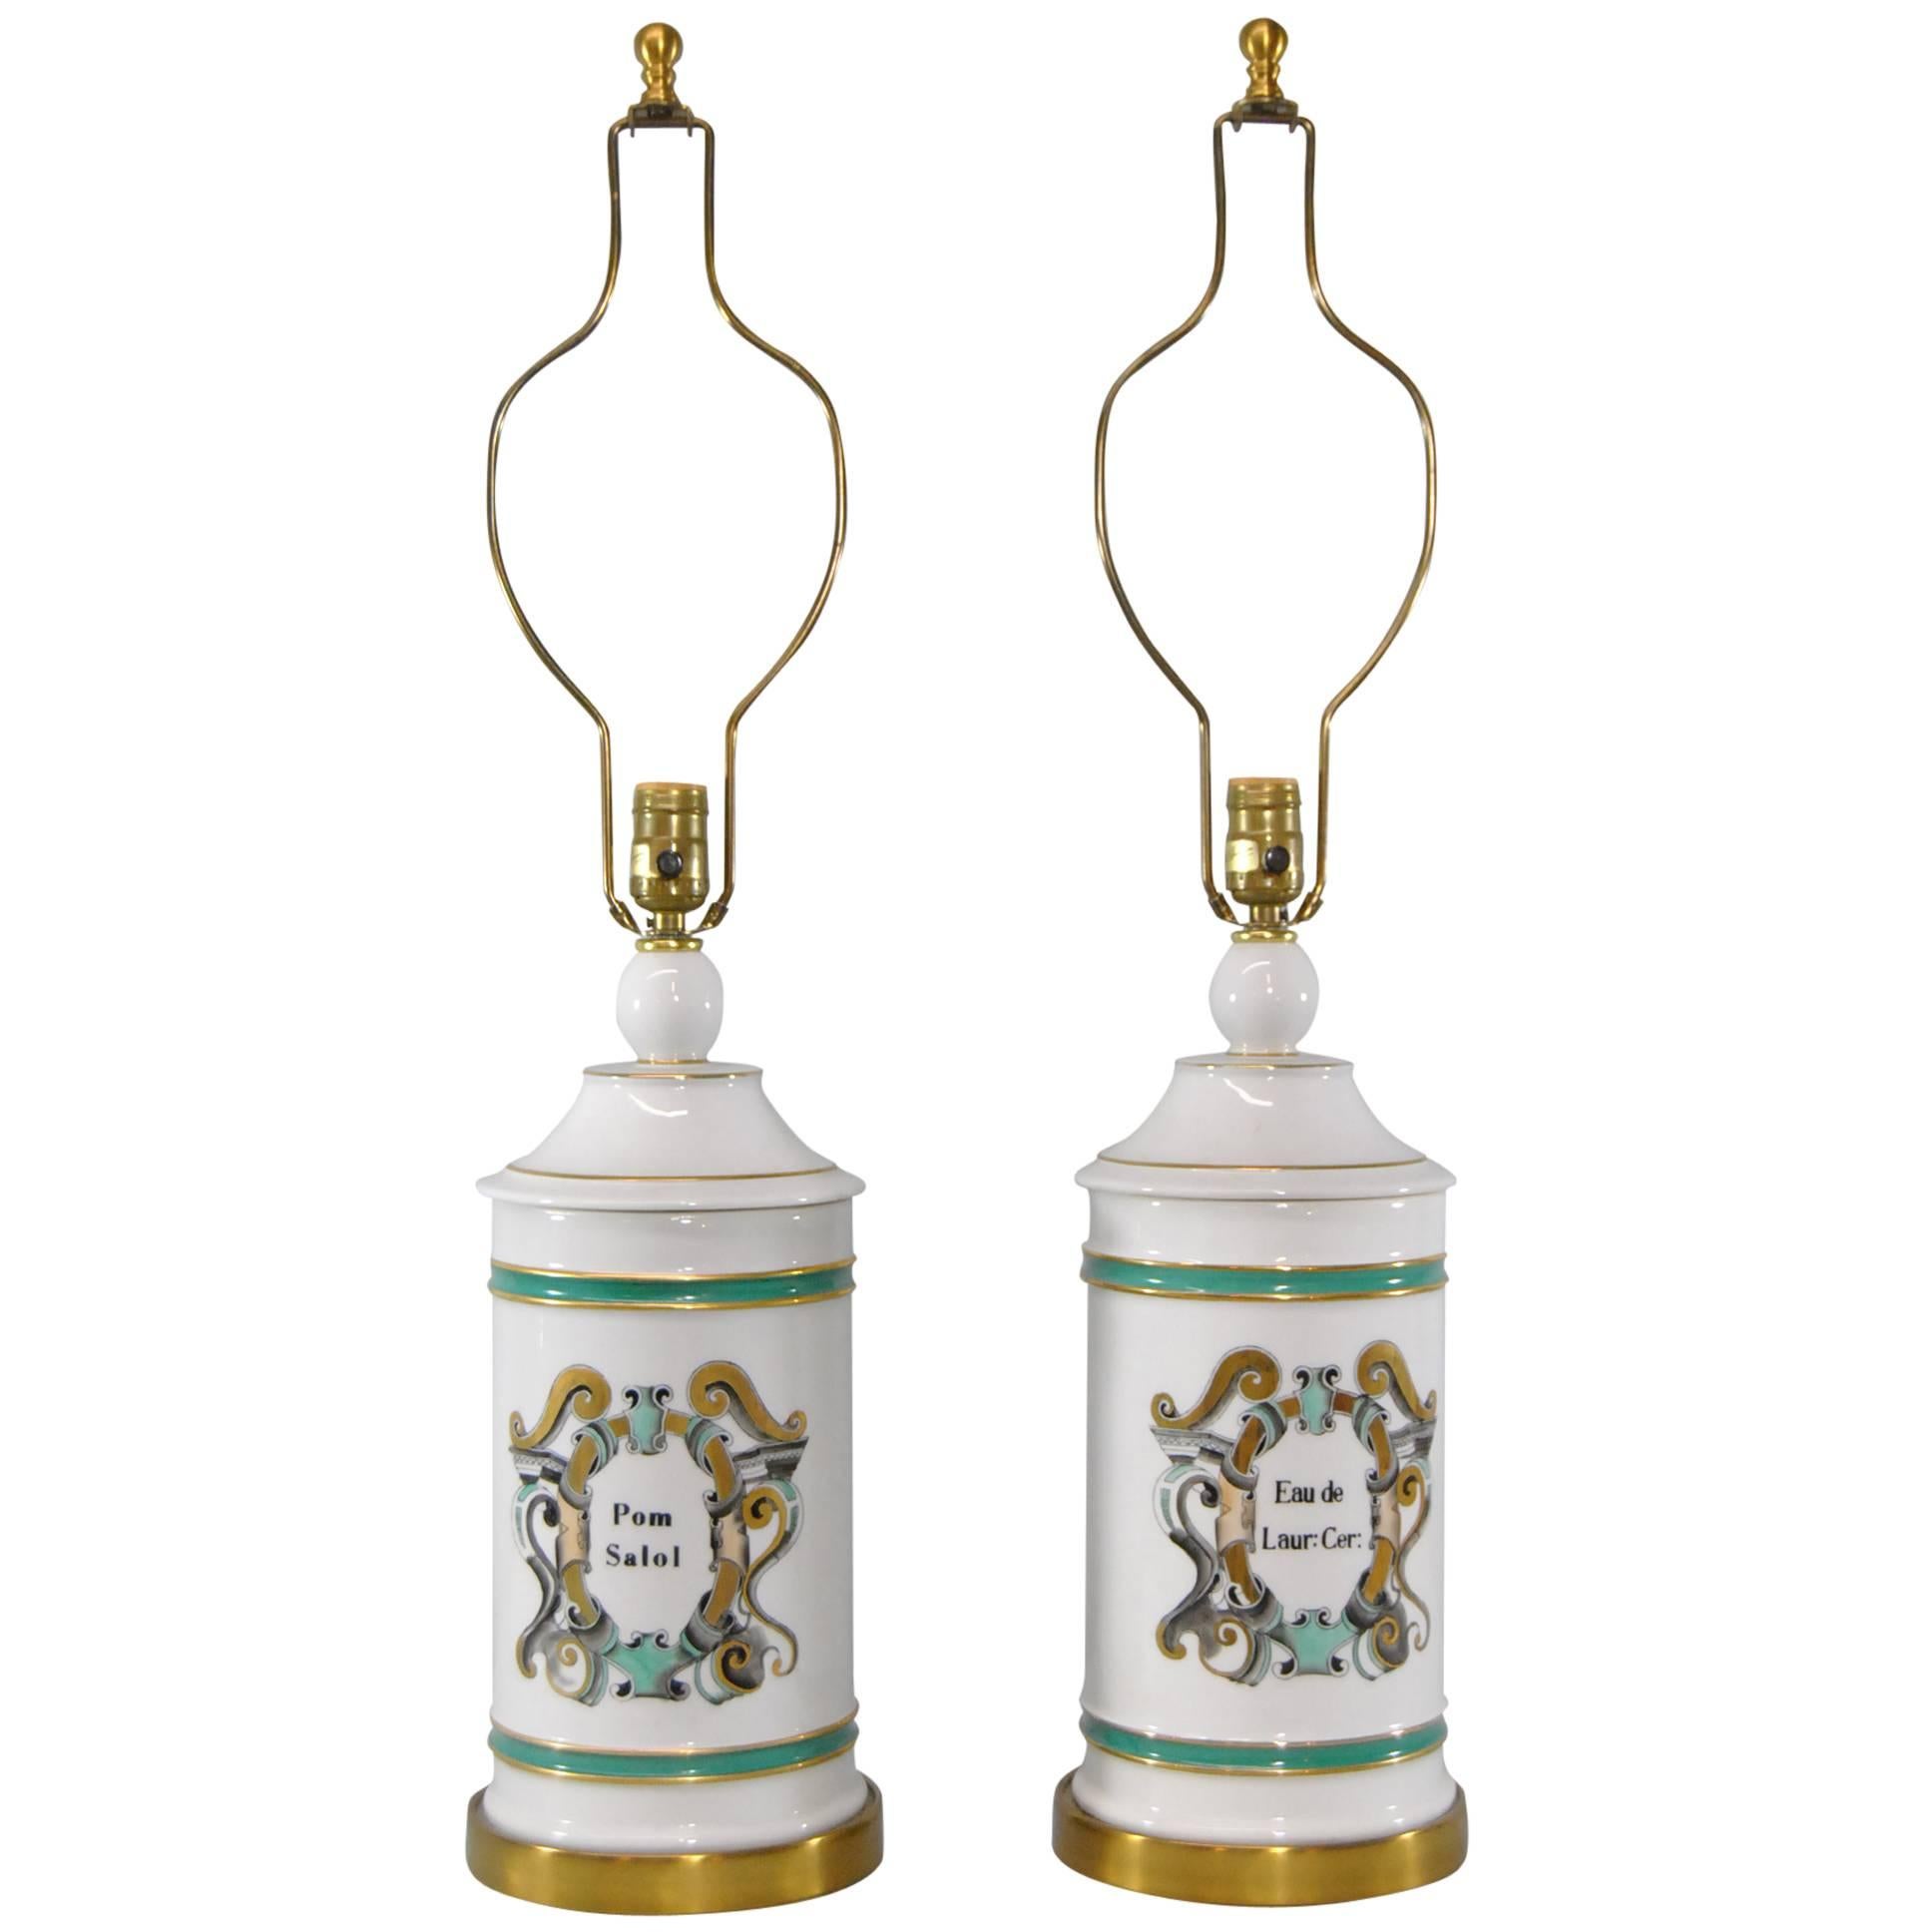 Pair of Apothecary Jar Lamps with French Motif by Paul Hanson